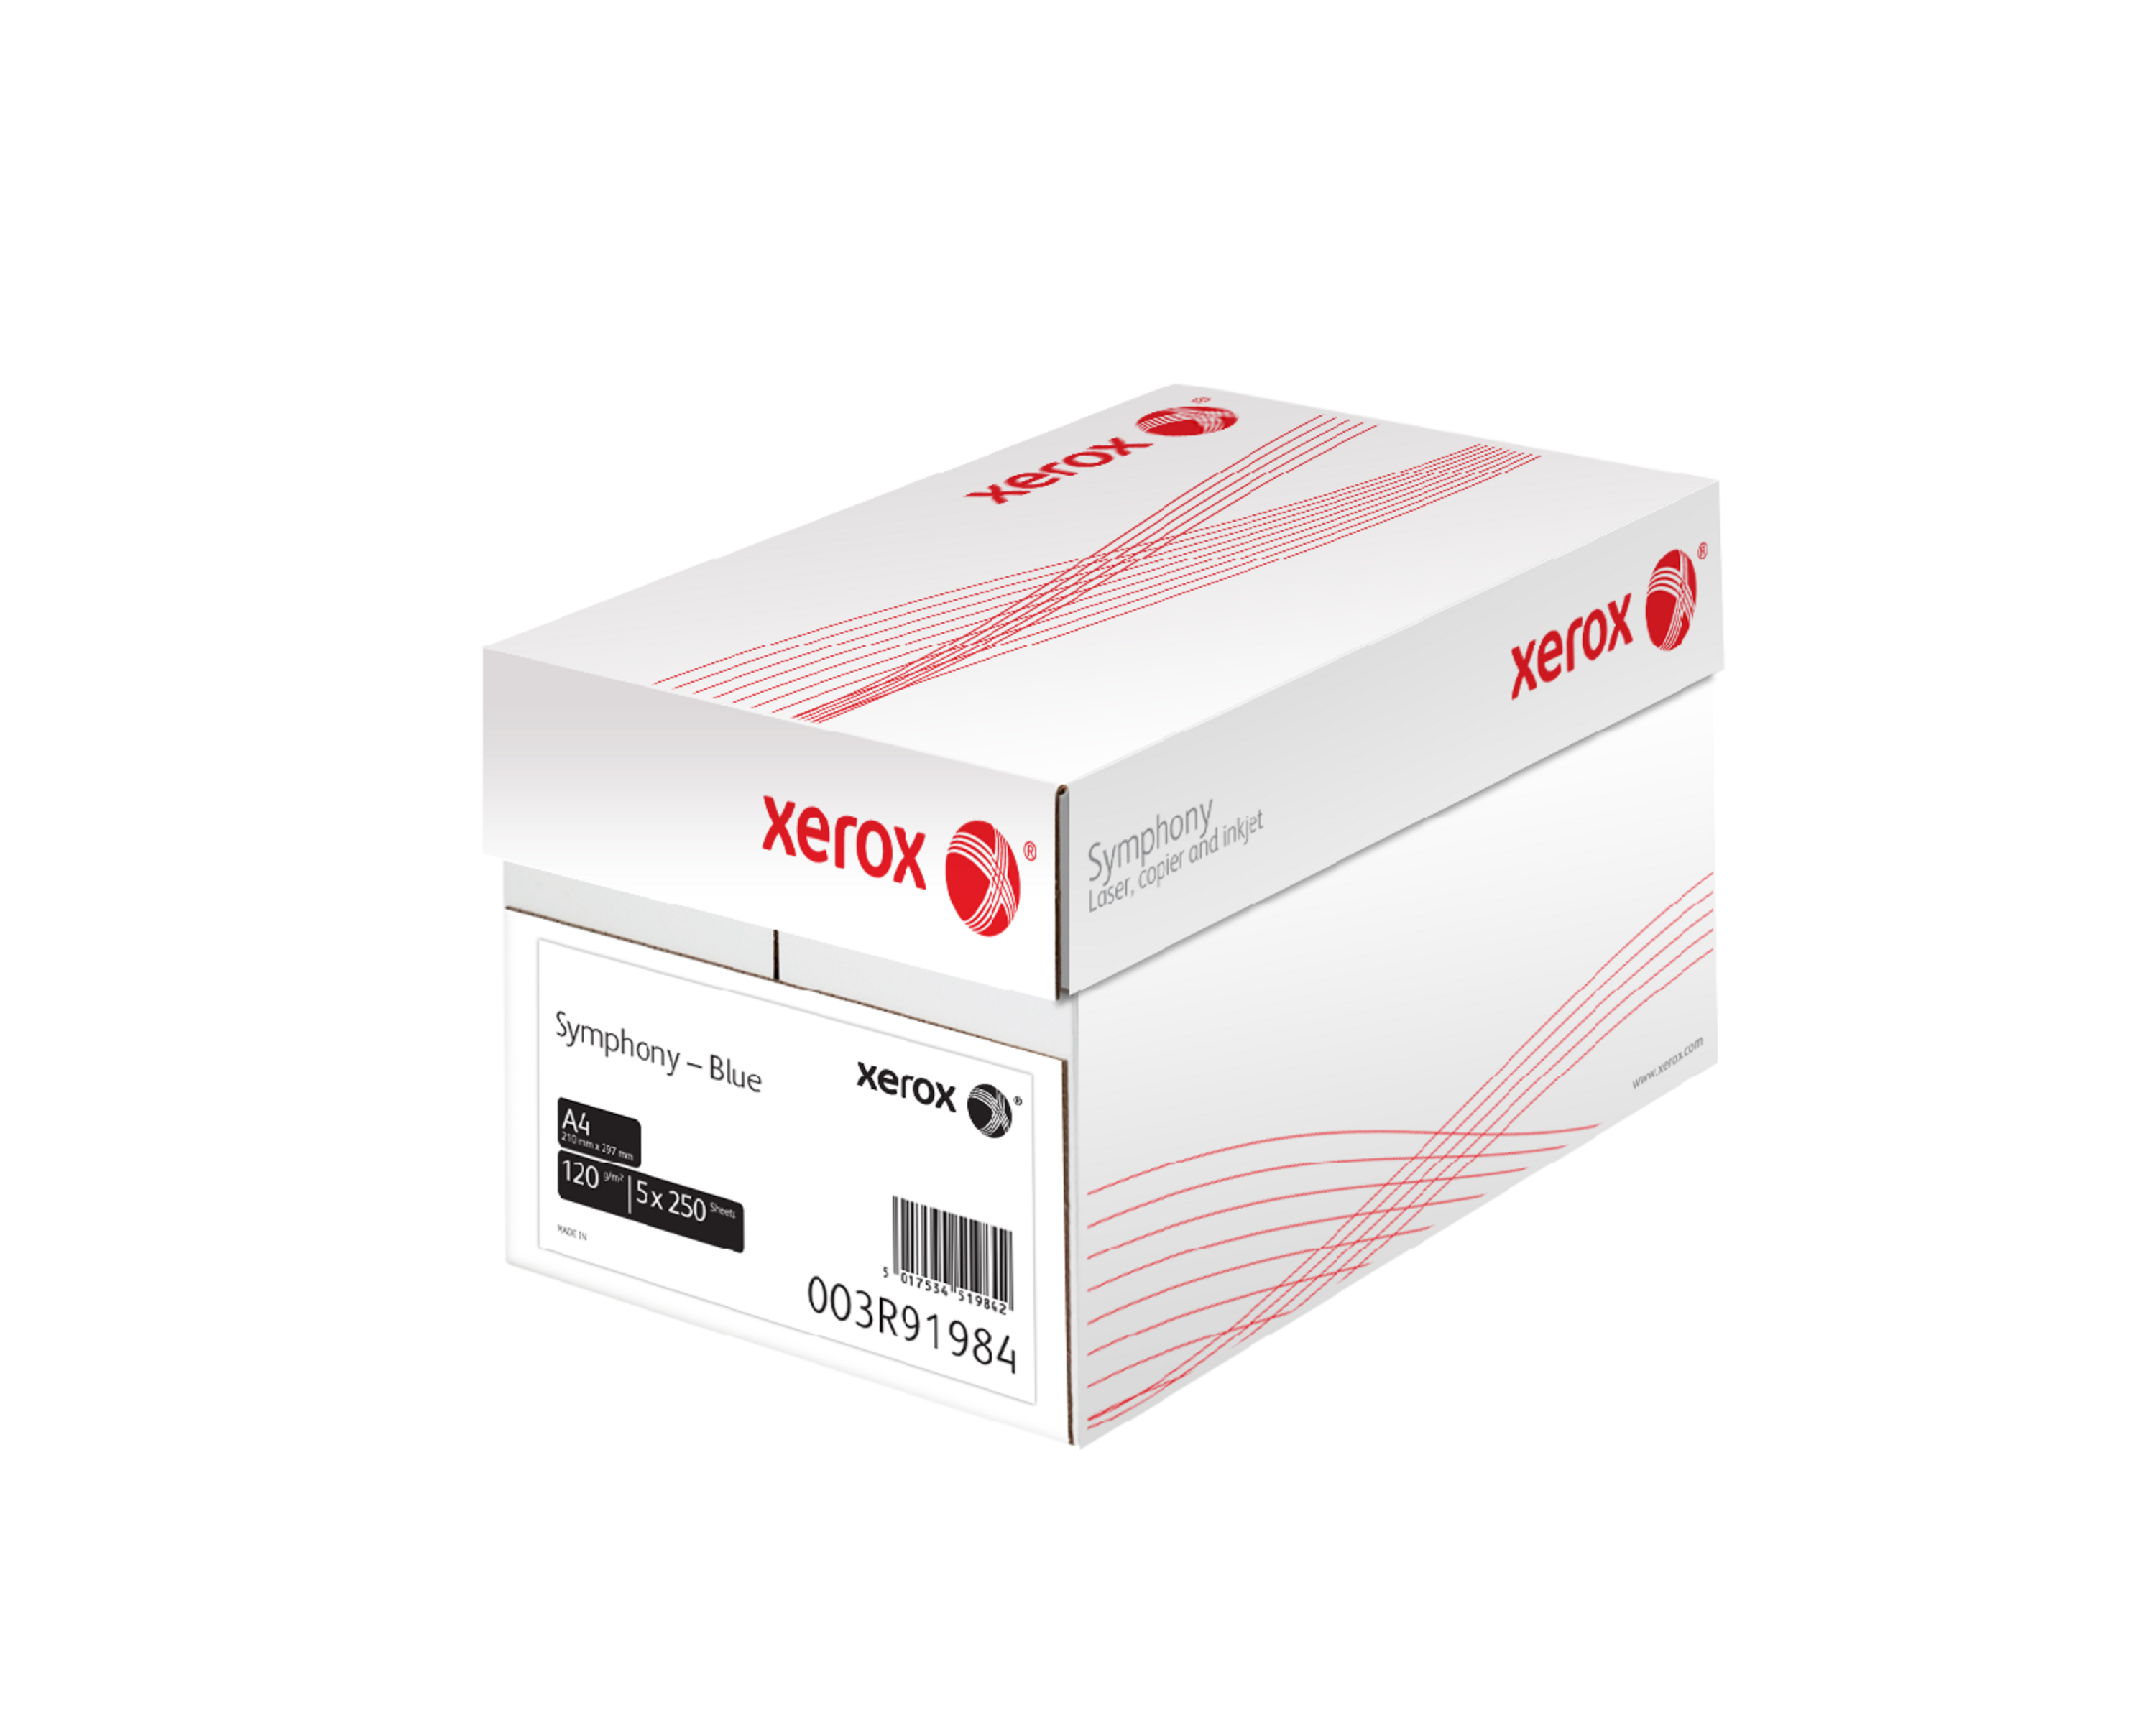 Xerox A4 Symphony Tinted 80gsm Copier Paper Rainbow Box Pack Of